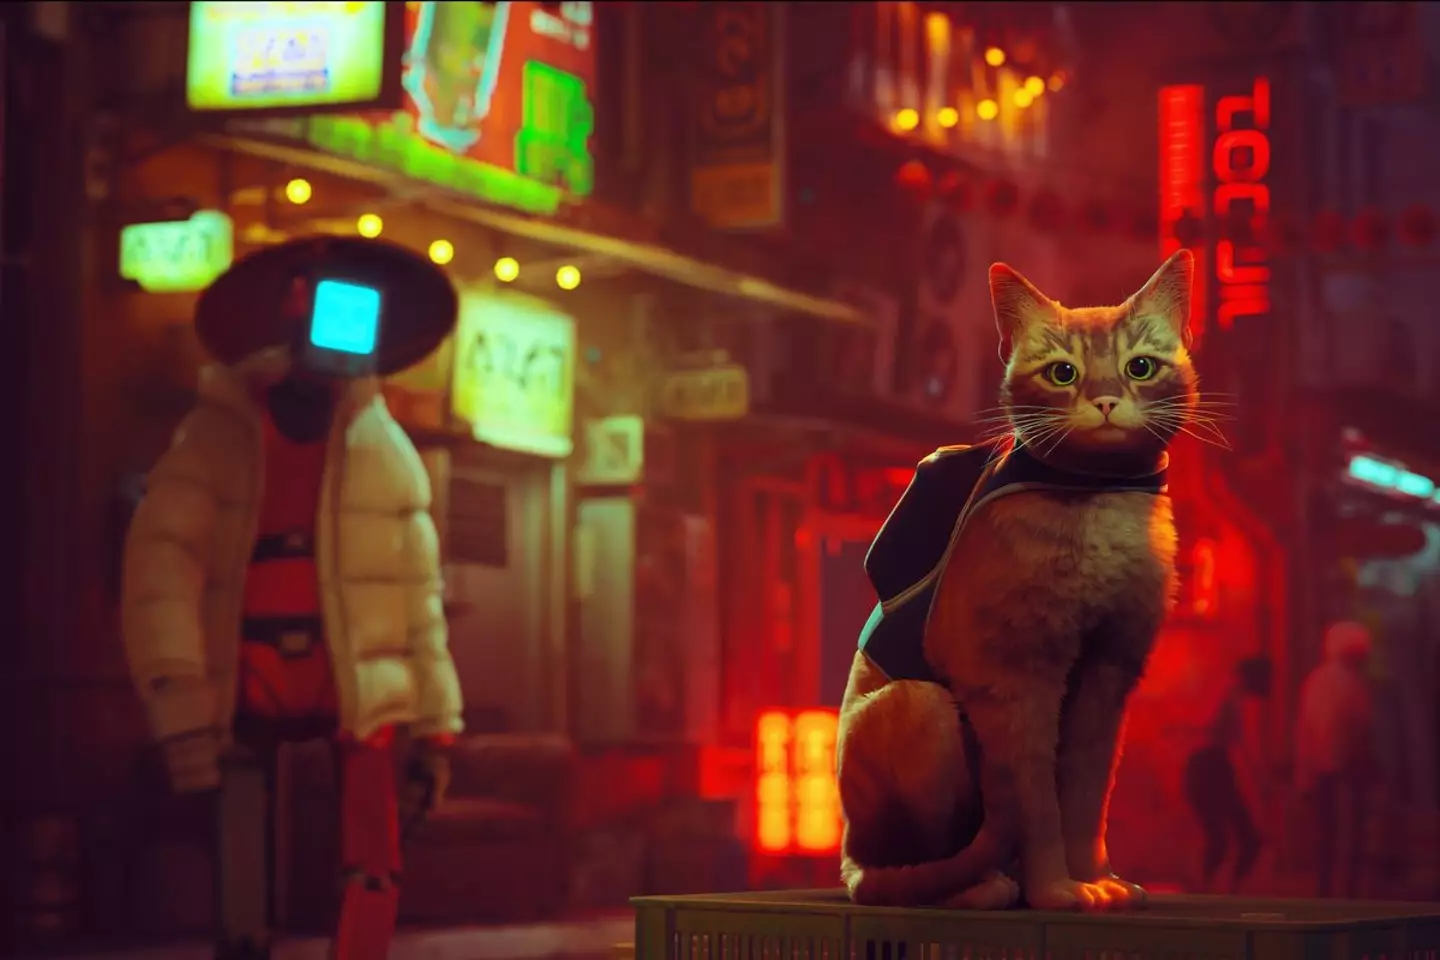 The game is billed as a ‘third-person cat adventure game’.